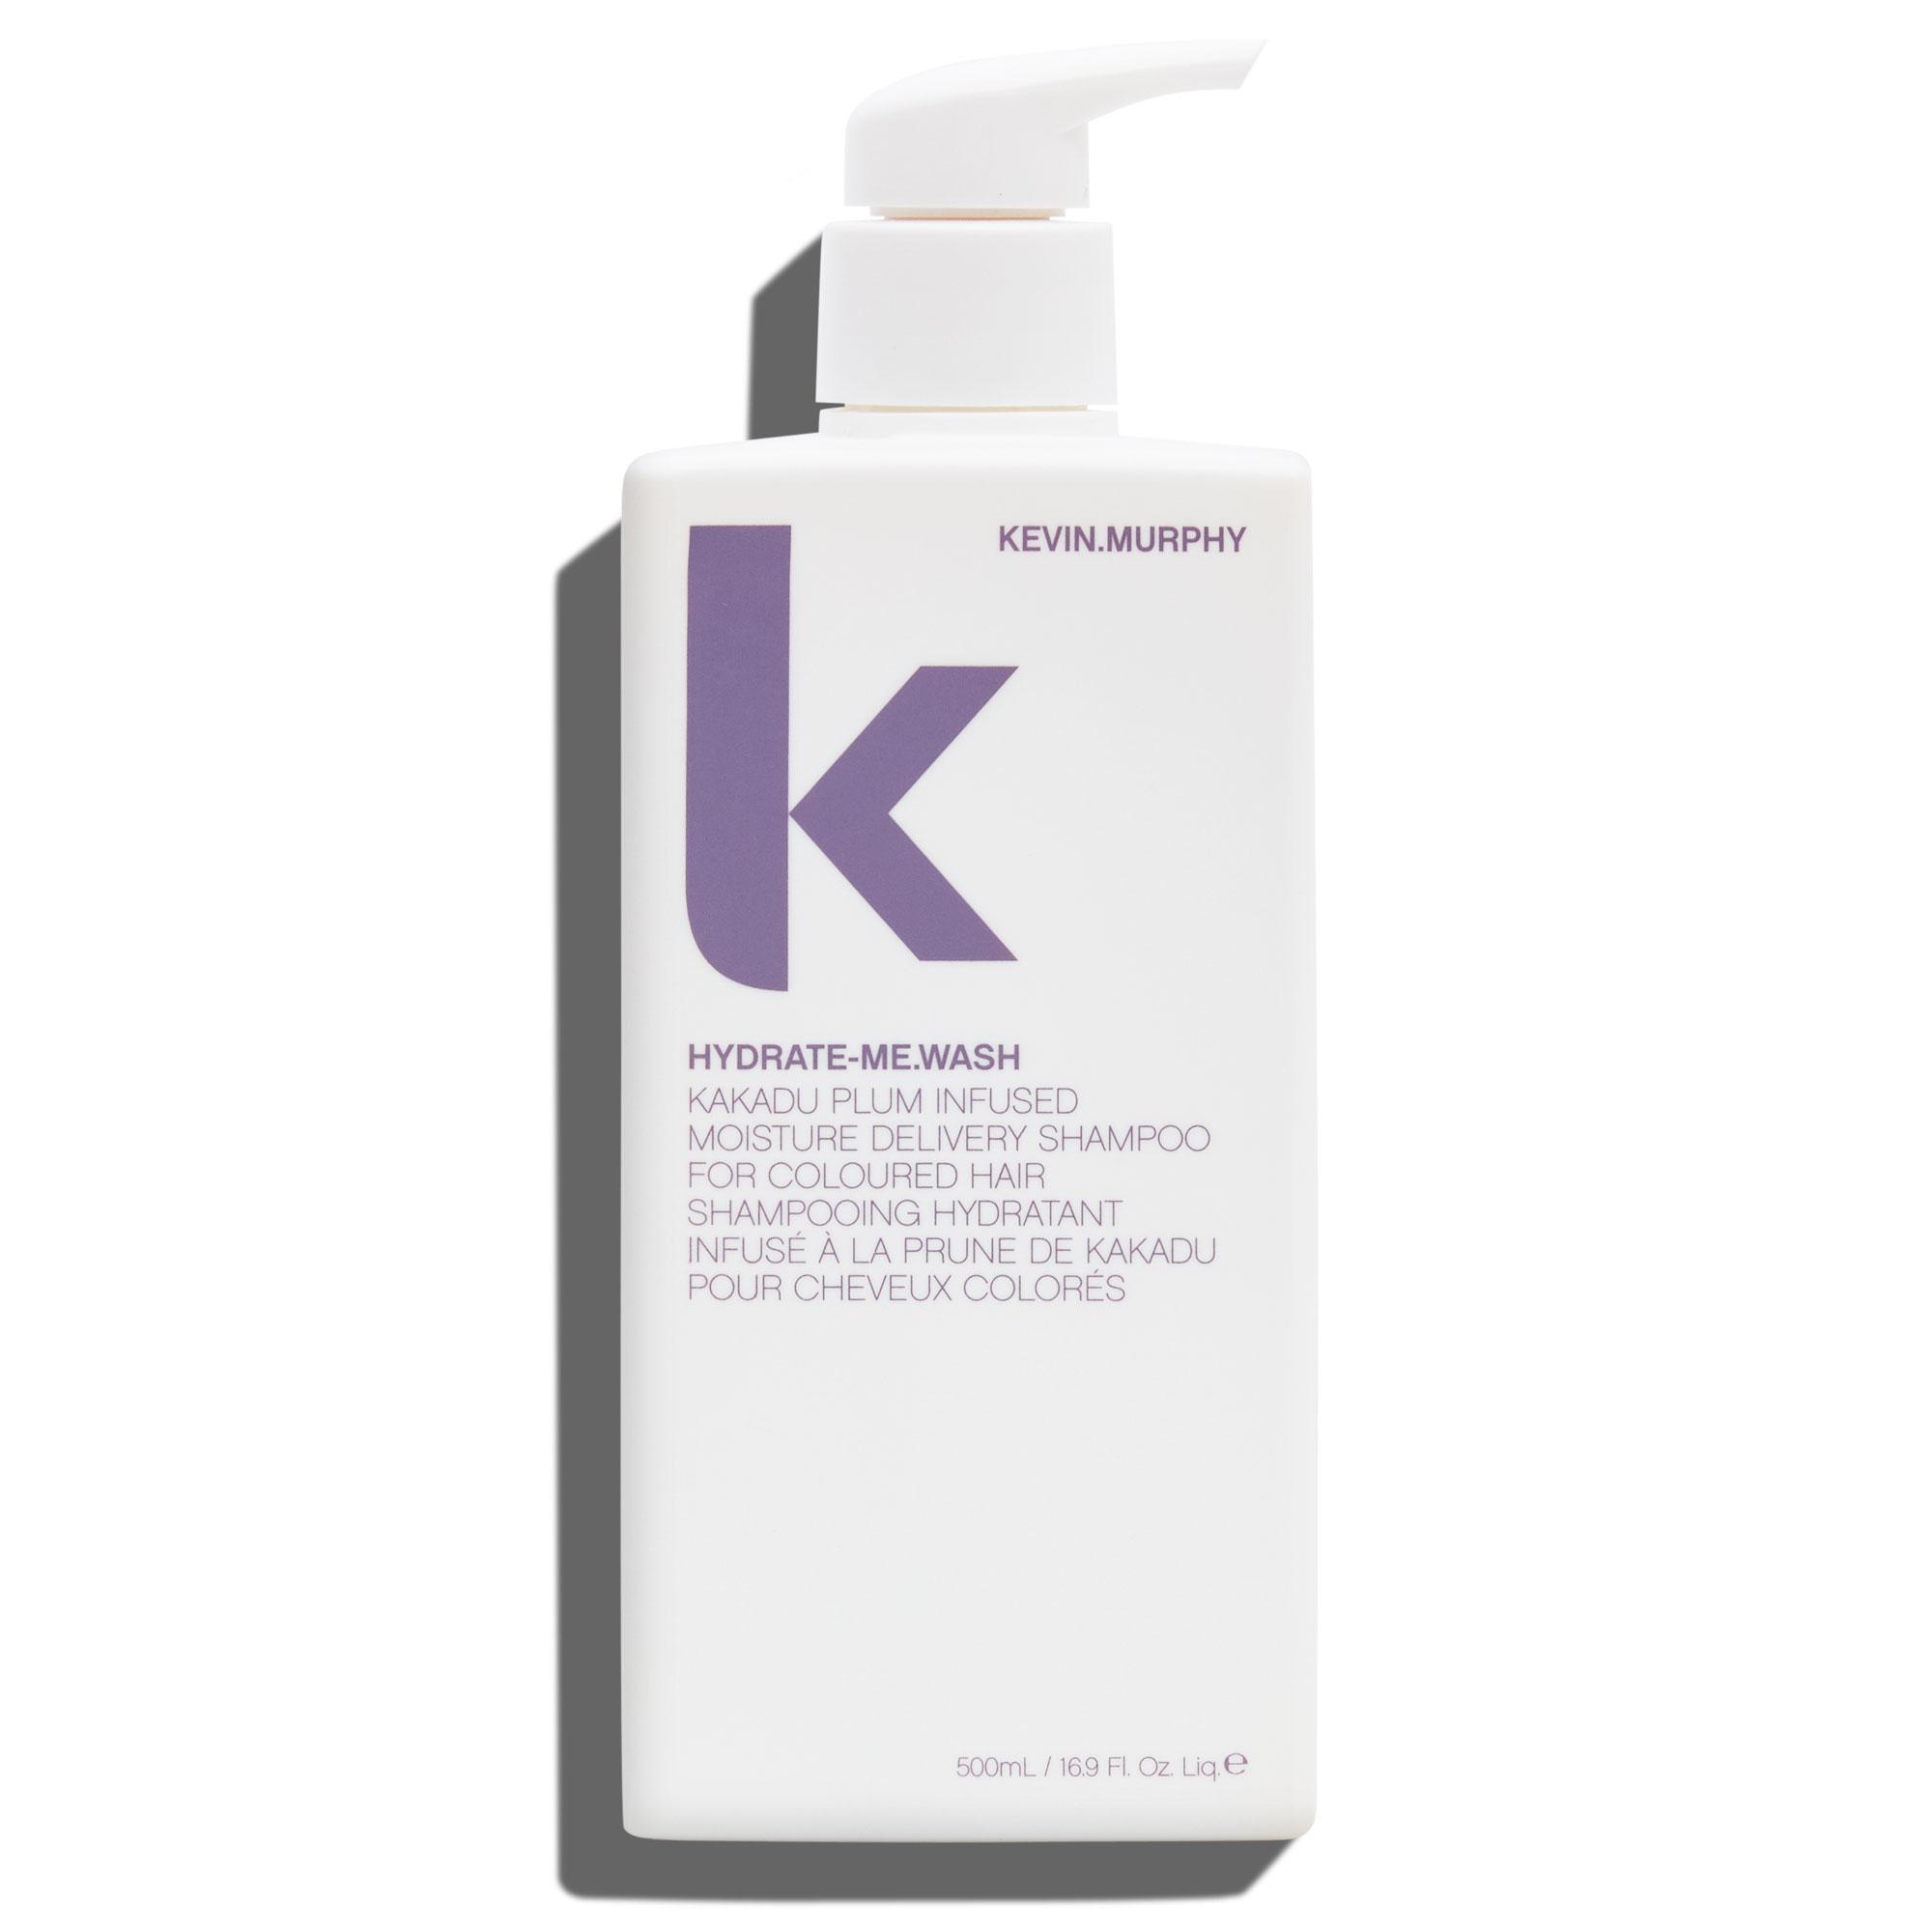 KEVIN.MURPHY HYDRATE-ME.WASH (Limited Edition)